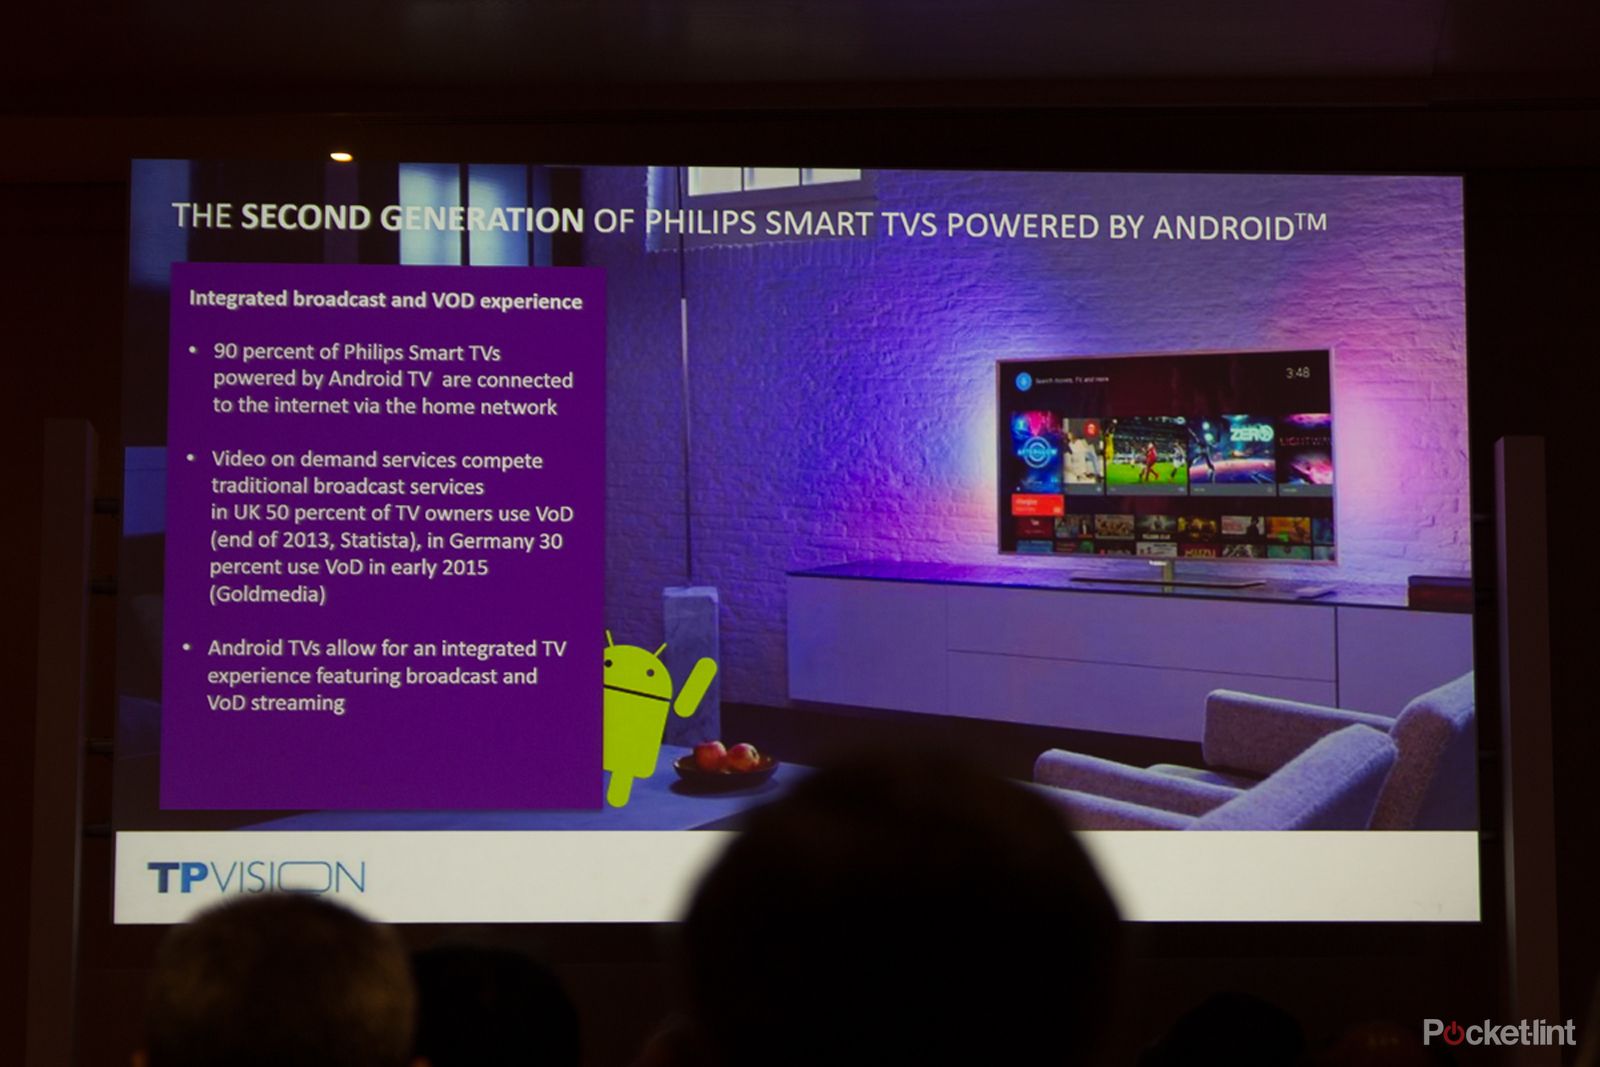 tp vision 90 per cent of philips android tvs get connected image 1